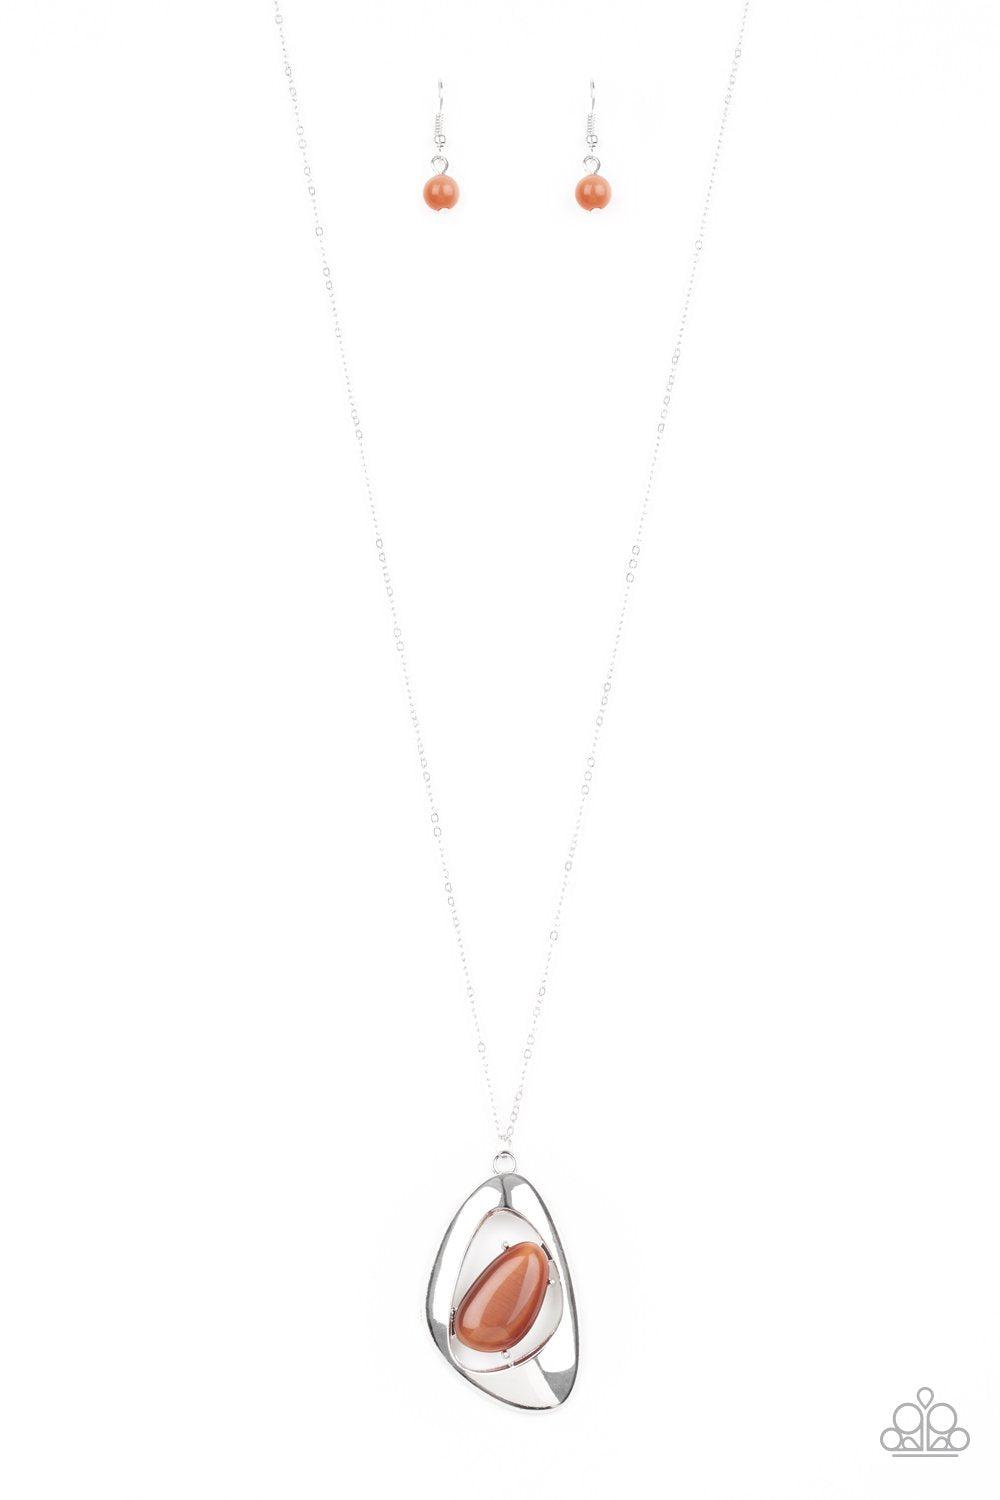 Asymmetrical Bliss Silver and Orange Moonstone Necklace - Paparazzi Accessories-CarasShop.com - $5 Jewelry by Cara Jewels